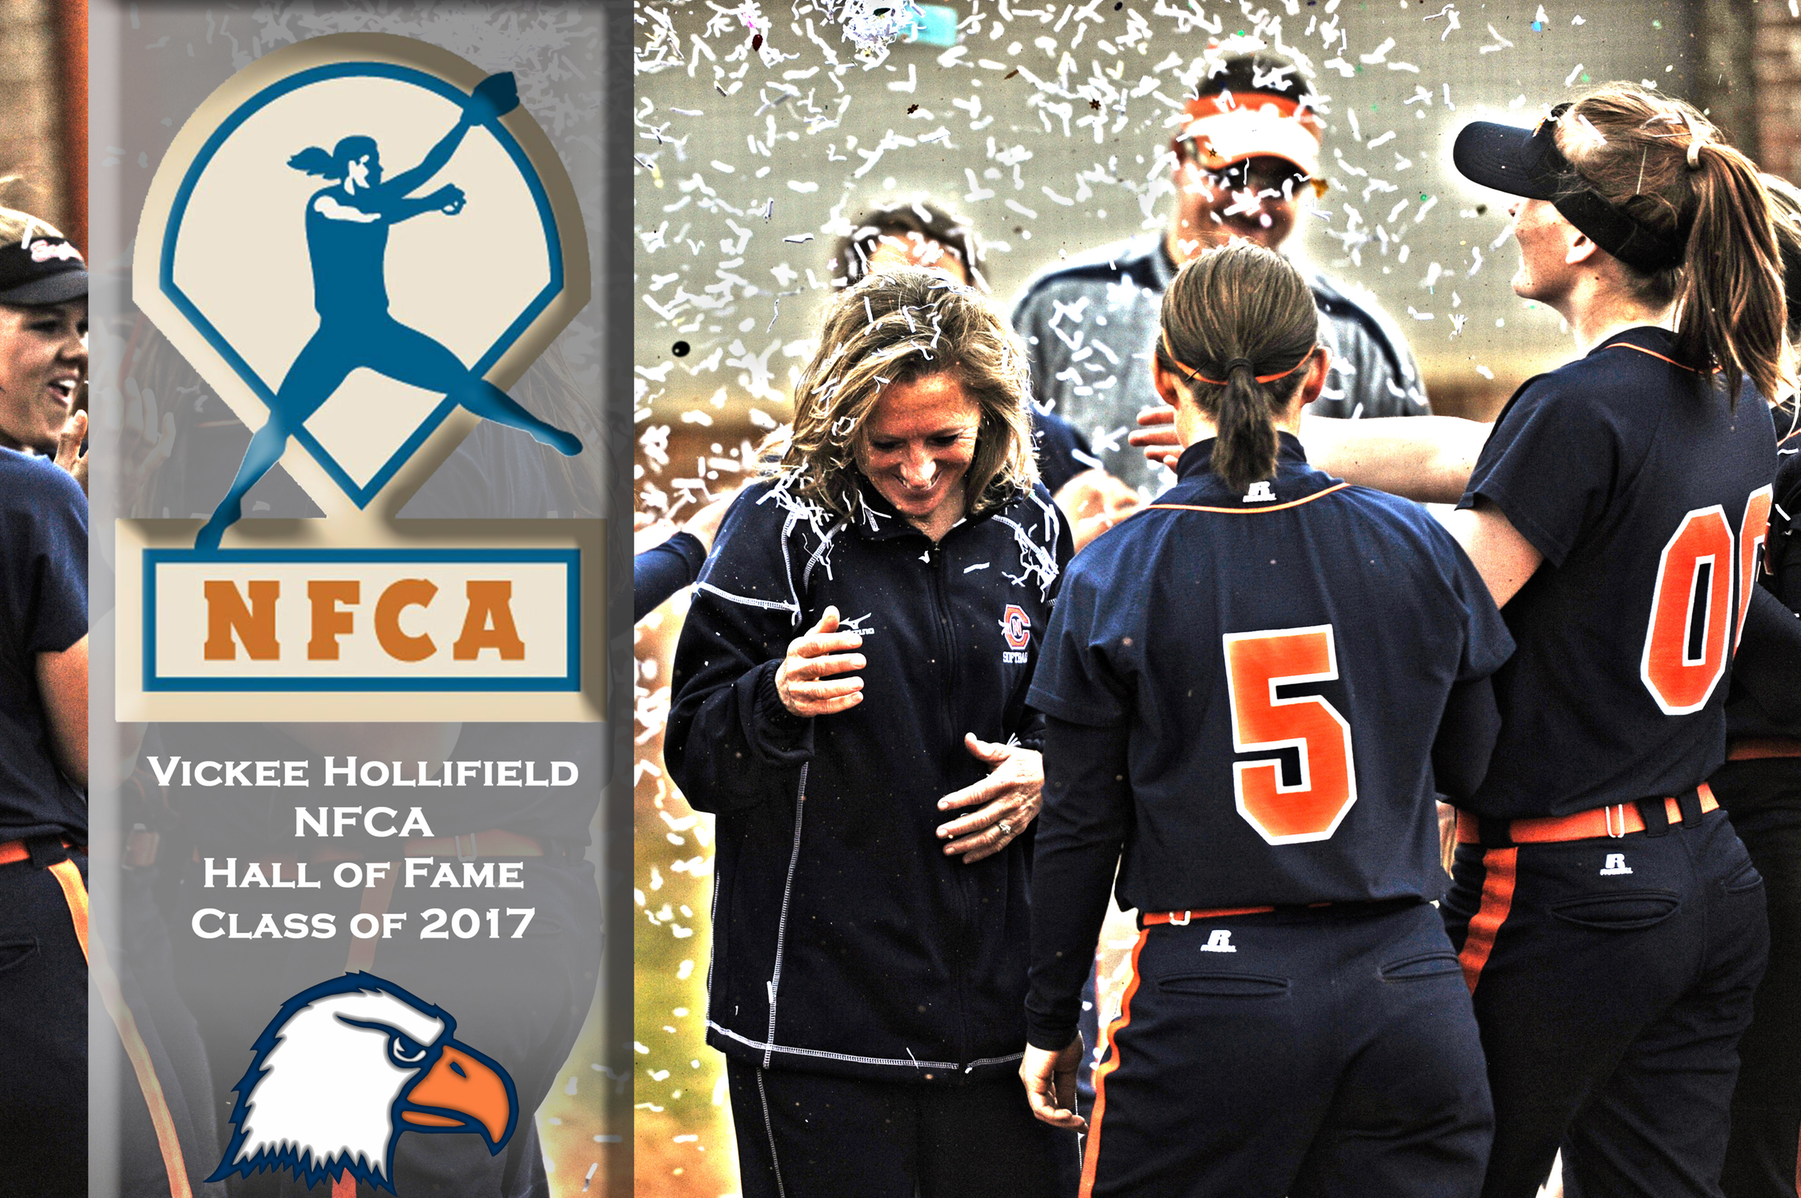 Kazee-Hollifield tabbed for induction into NFCA Hall of Fame